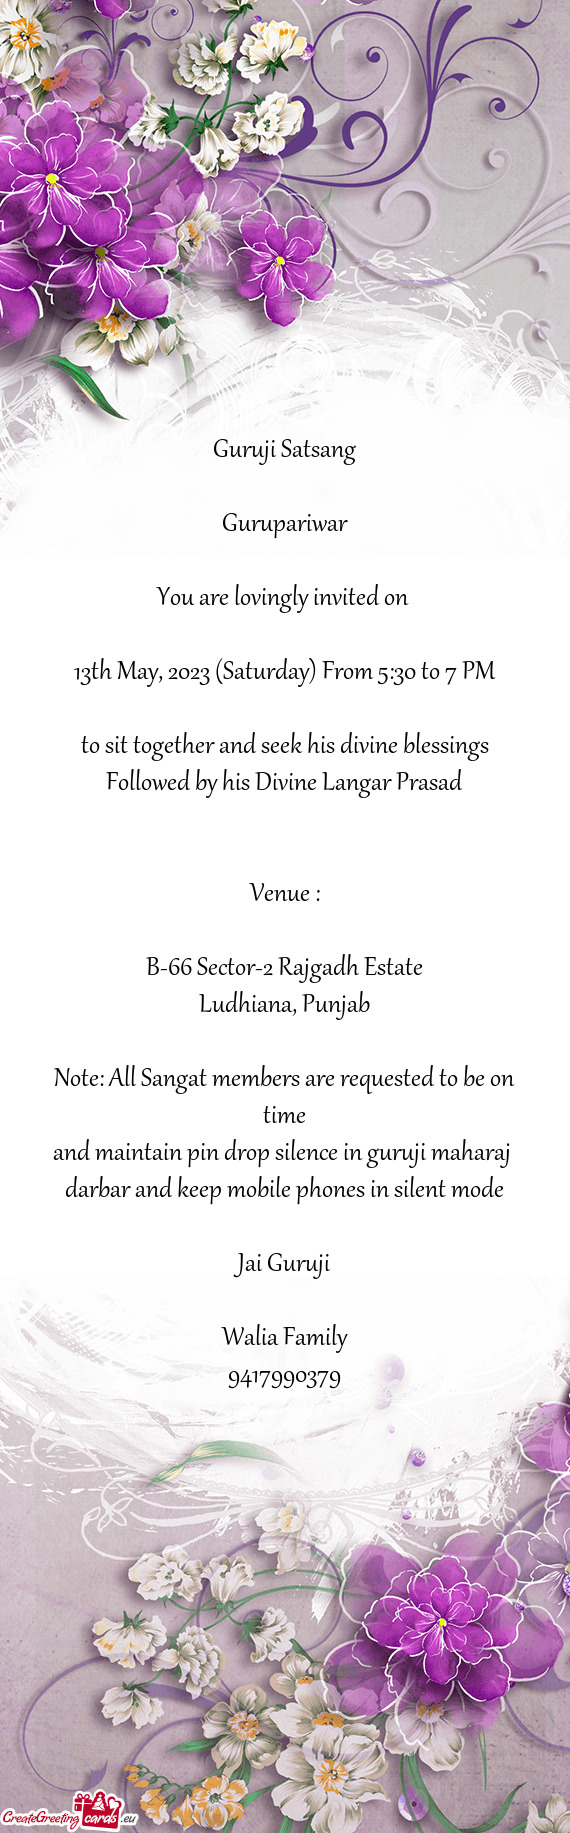 13th May, 2023 (Saturday) From 5:30 to 7 PM